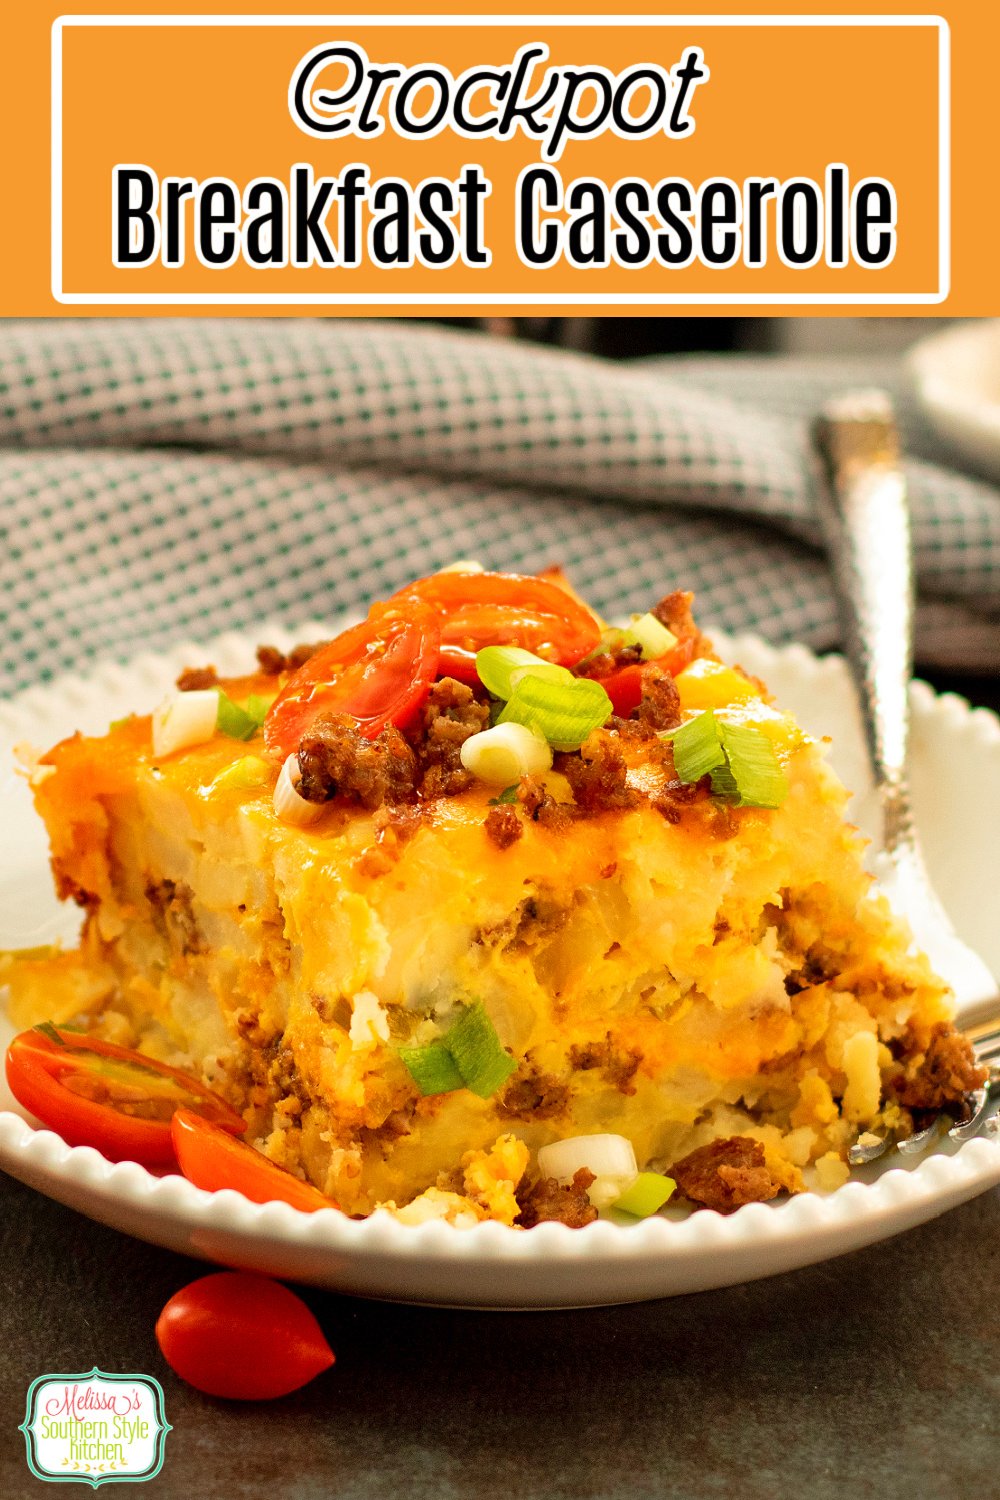 This easy Crockpot Breakfast Casserole can be fully assembled and cooked overnight for a delicious start to the day #crockpotcasserole #crockpotrecipes #slowcookerrecipes #breakfastcasserole #crockpothashbrowns #crockpotbreakfastcasserole #breakfastrecipes